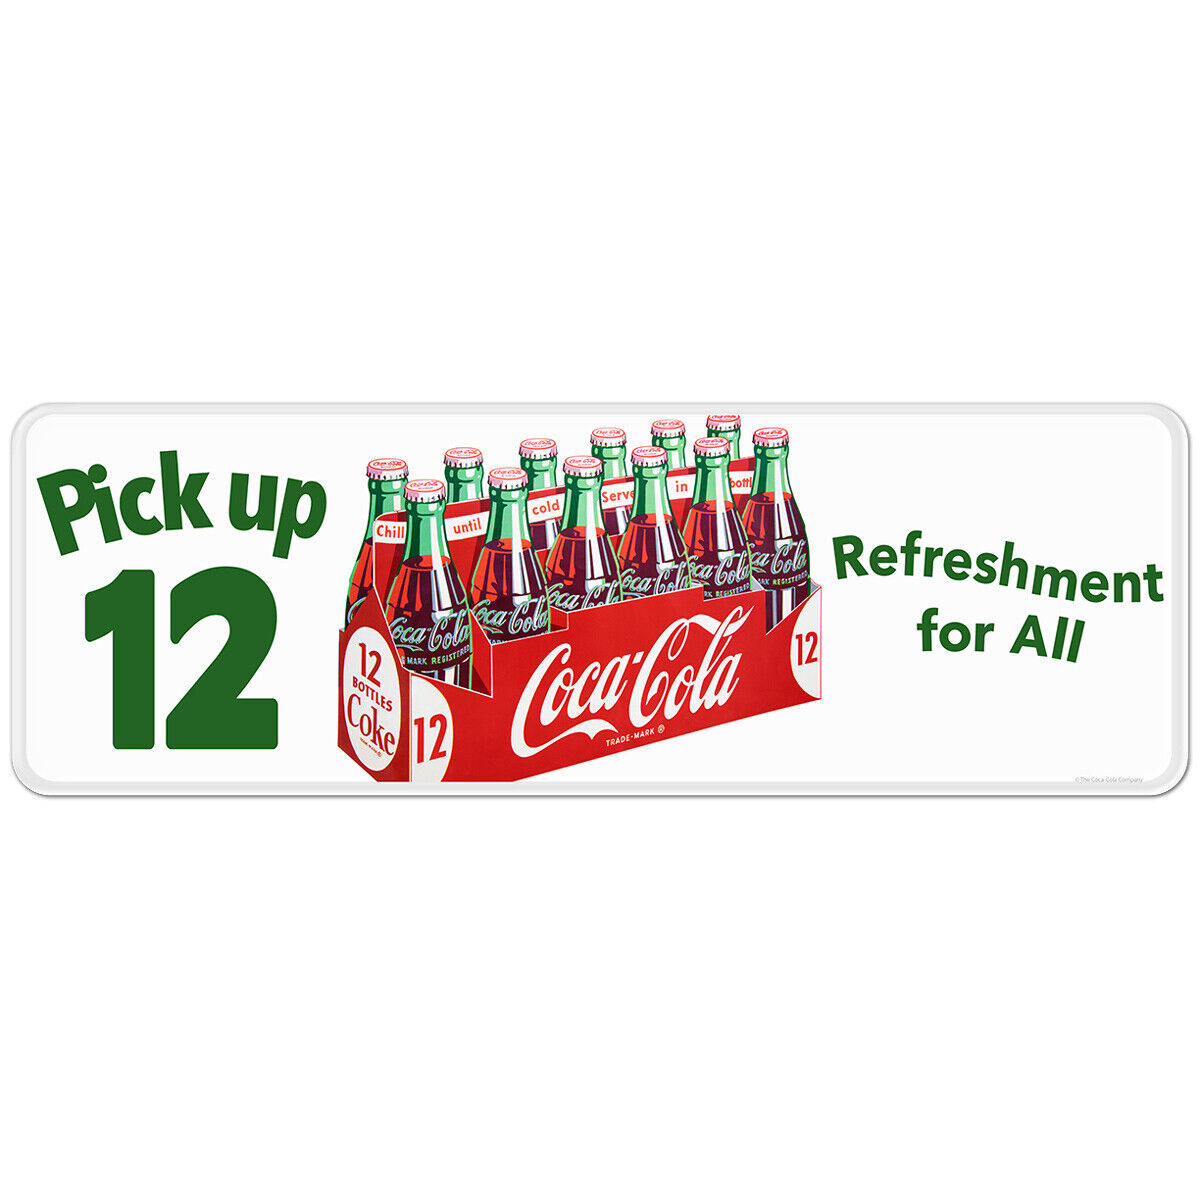 Pick Up 12 Coke Refreshment For All Decal 50s Style Officially Licensed Made US